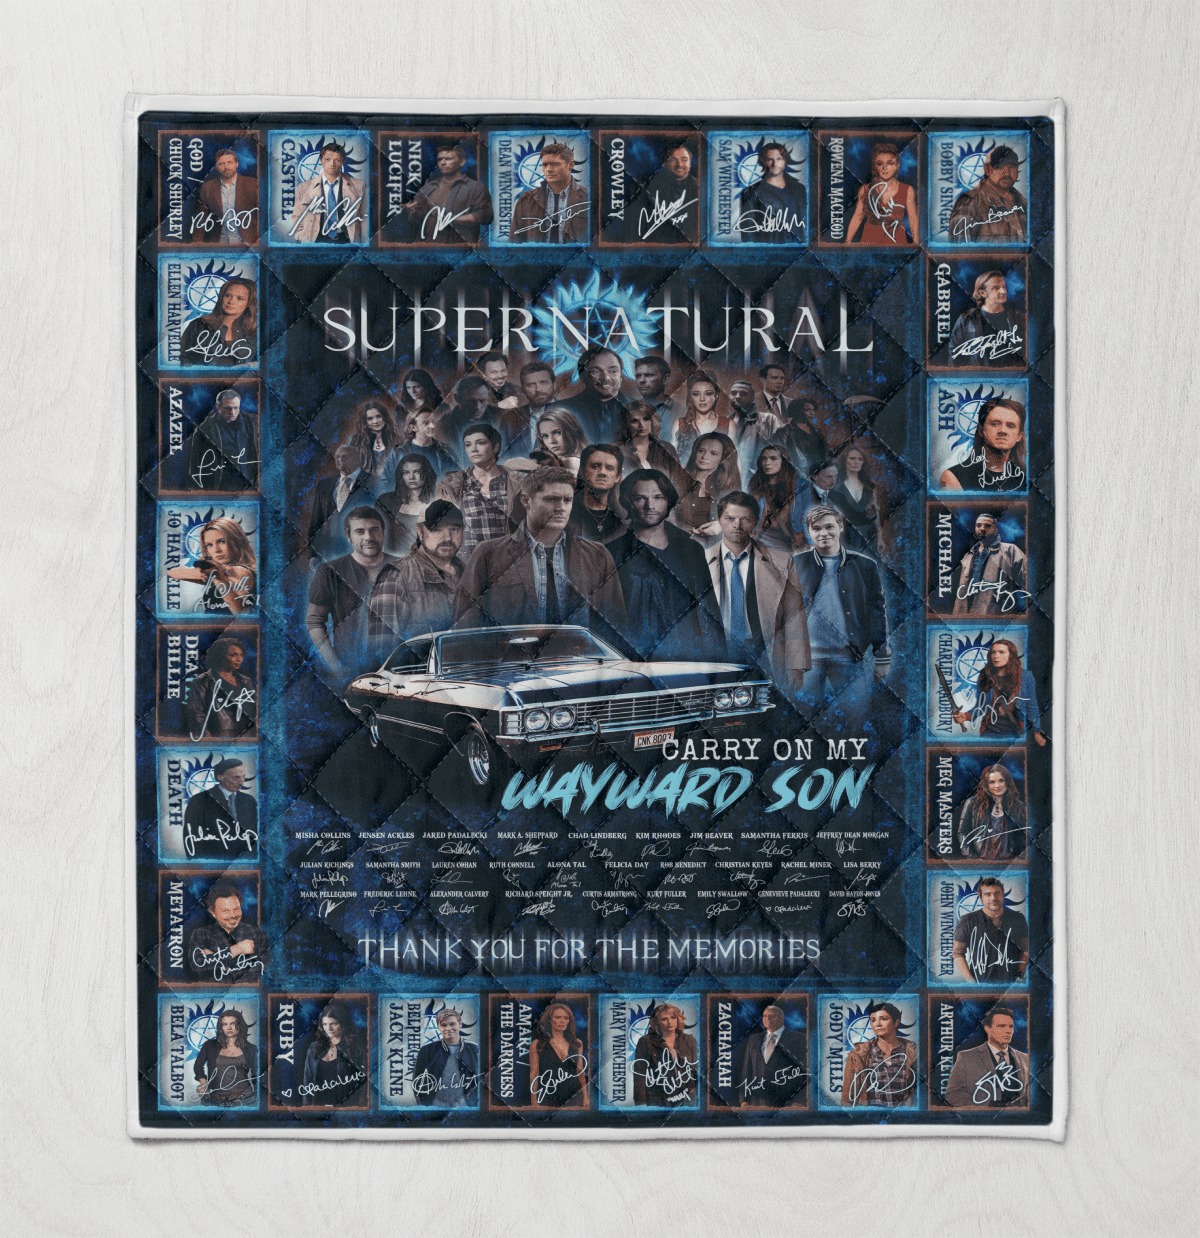 NEW Thank you for the memories Supernatural quilt 5